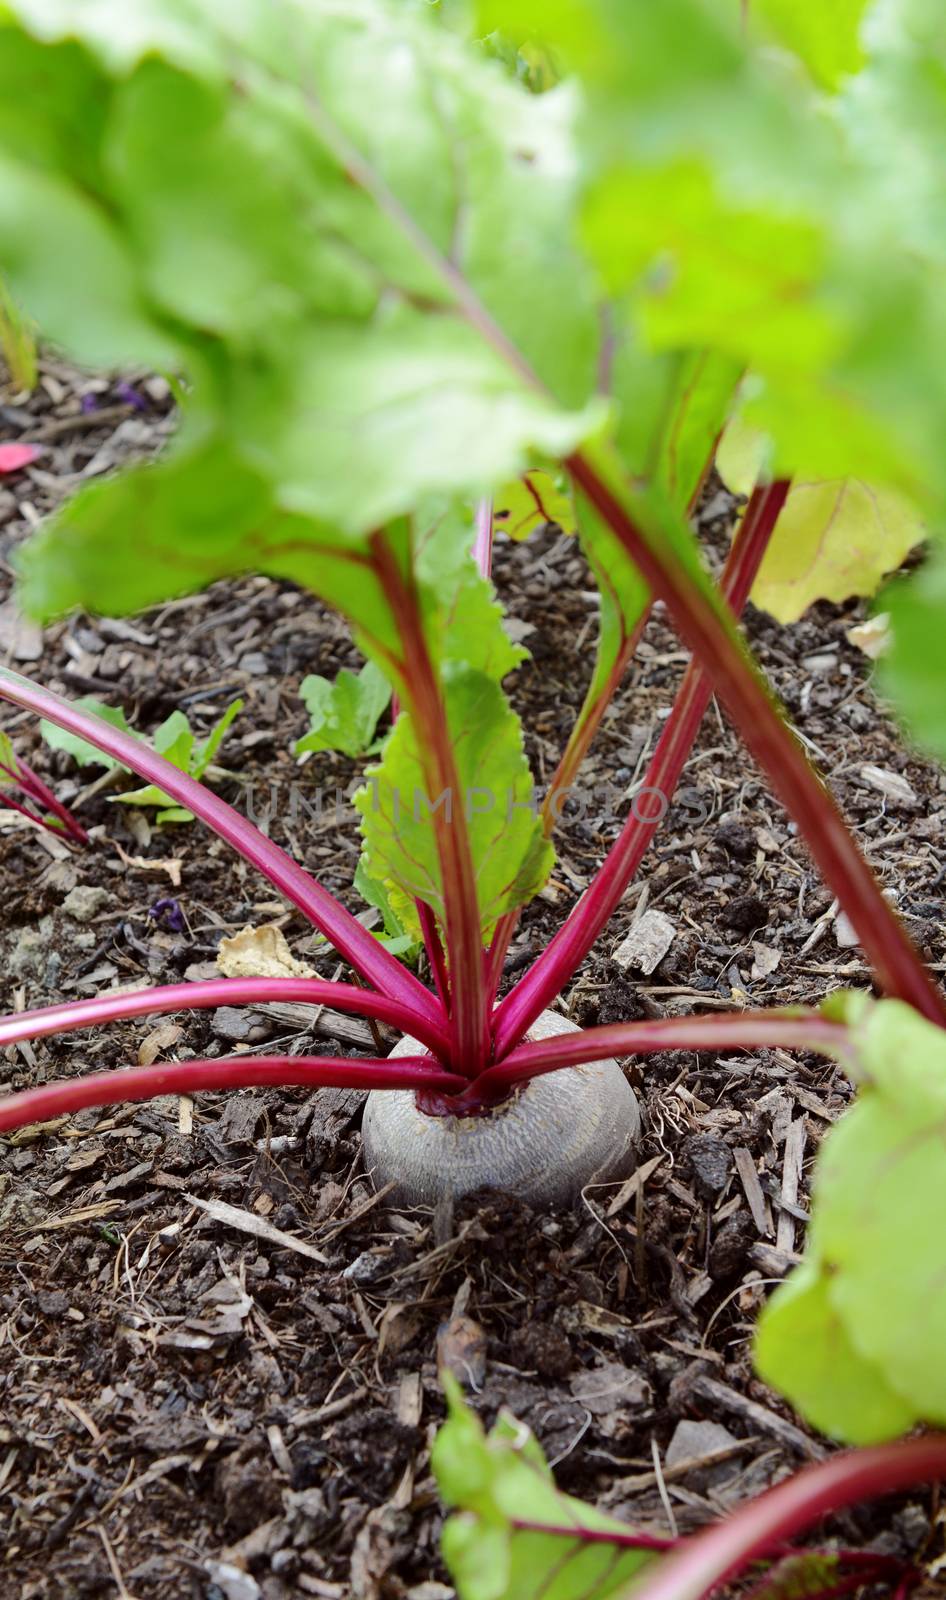 Red beetroot growing in a vegetable garden, with deep red stalks topped by green leaves